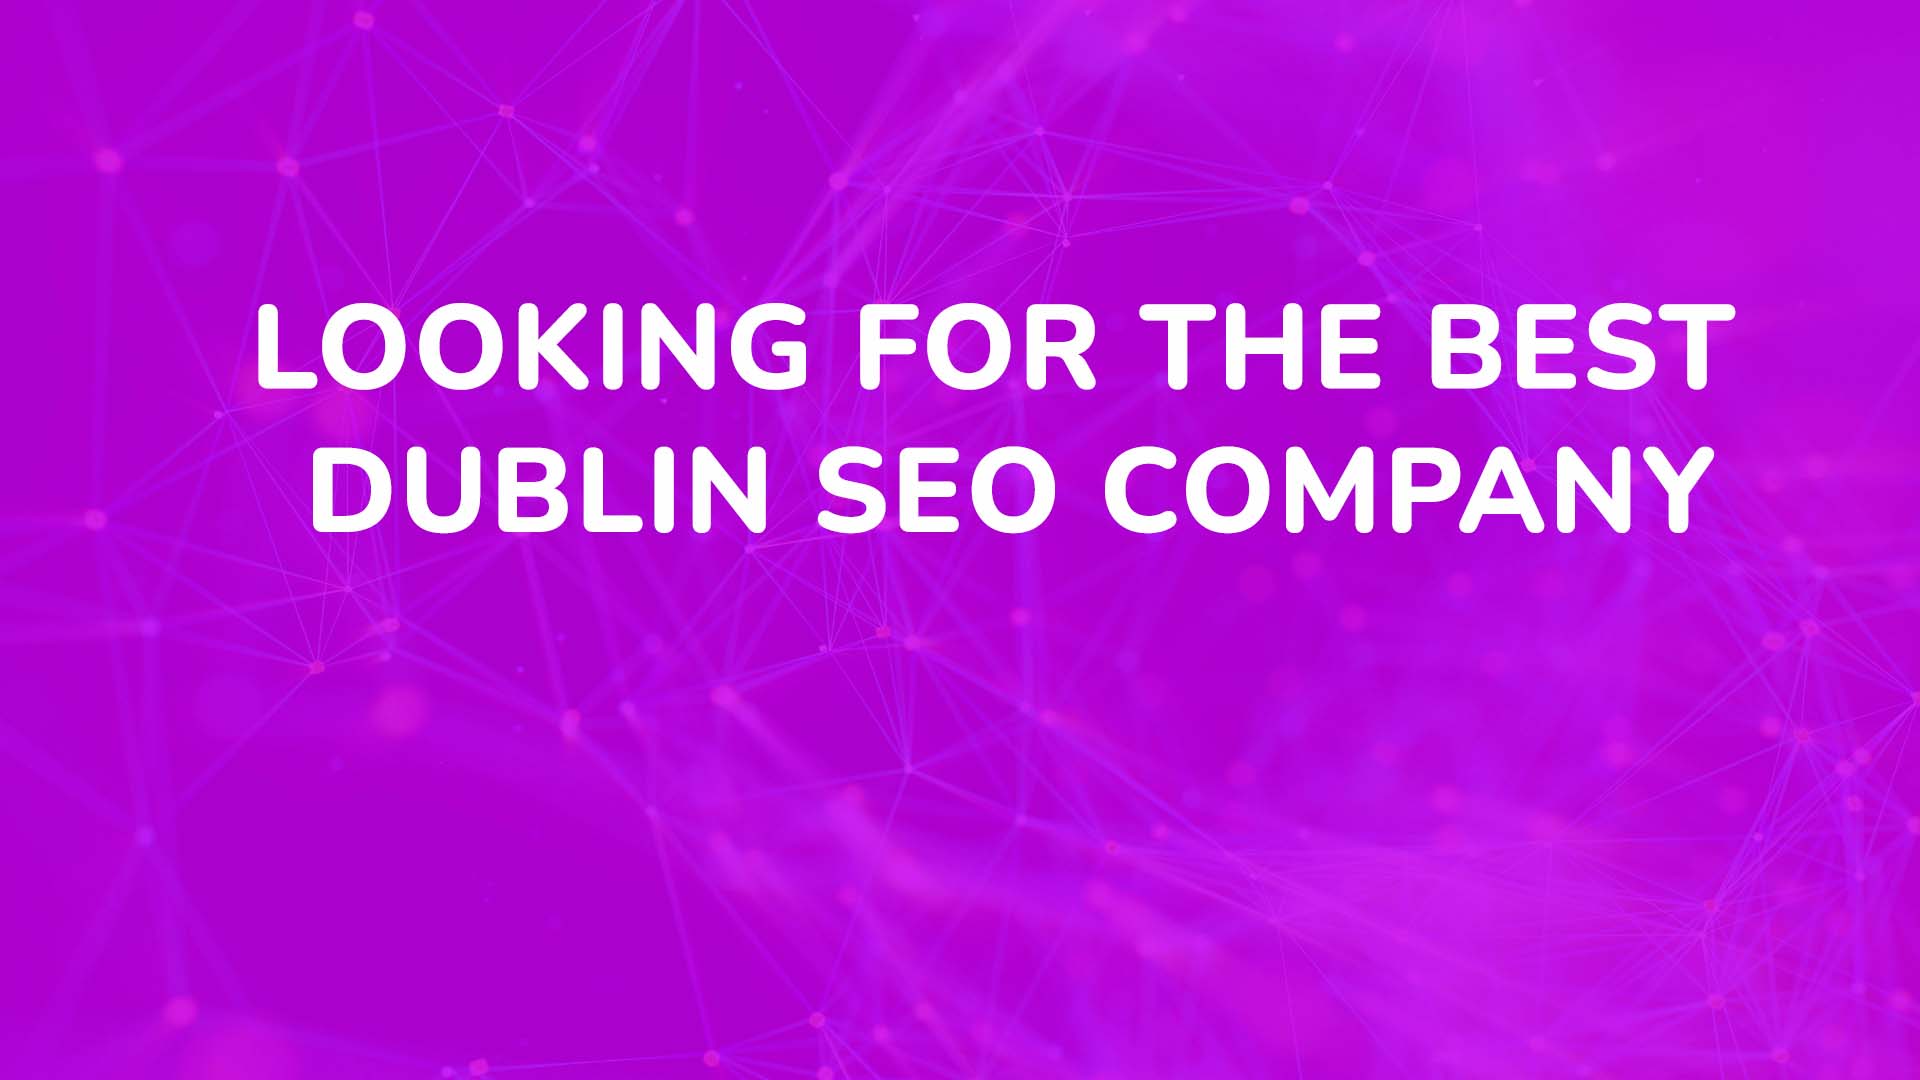 Looking for the best DUBLIN SEO company